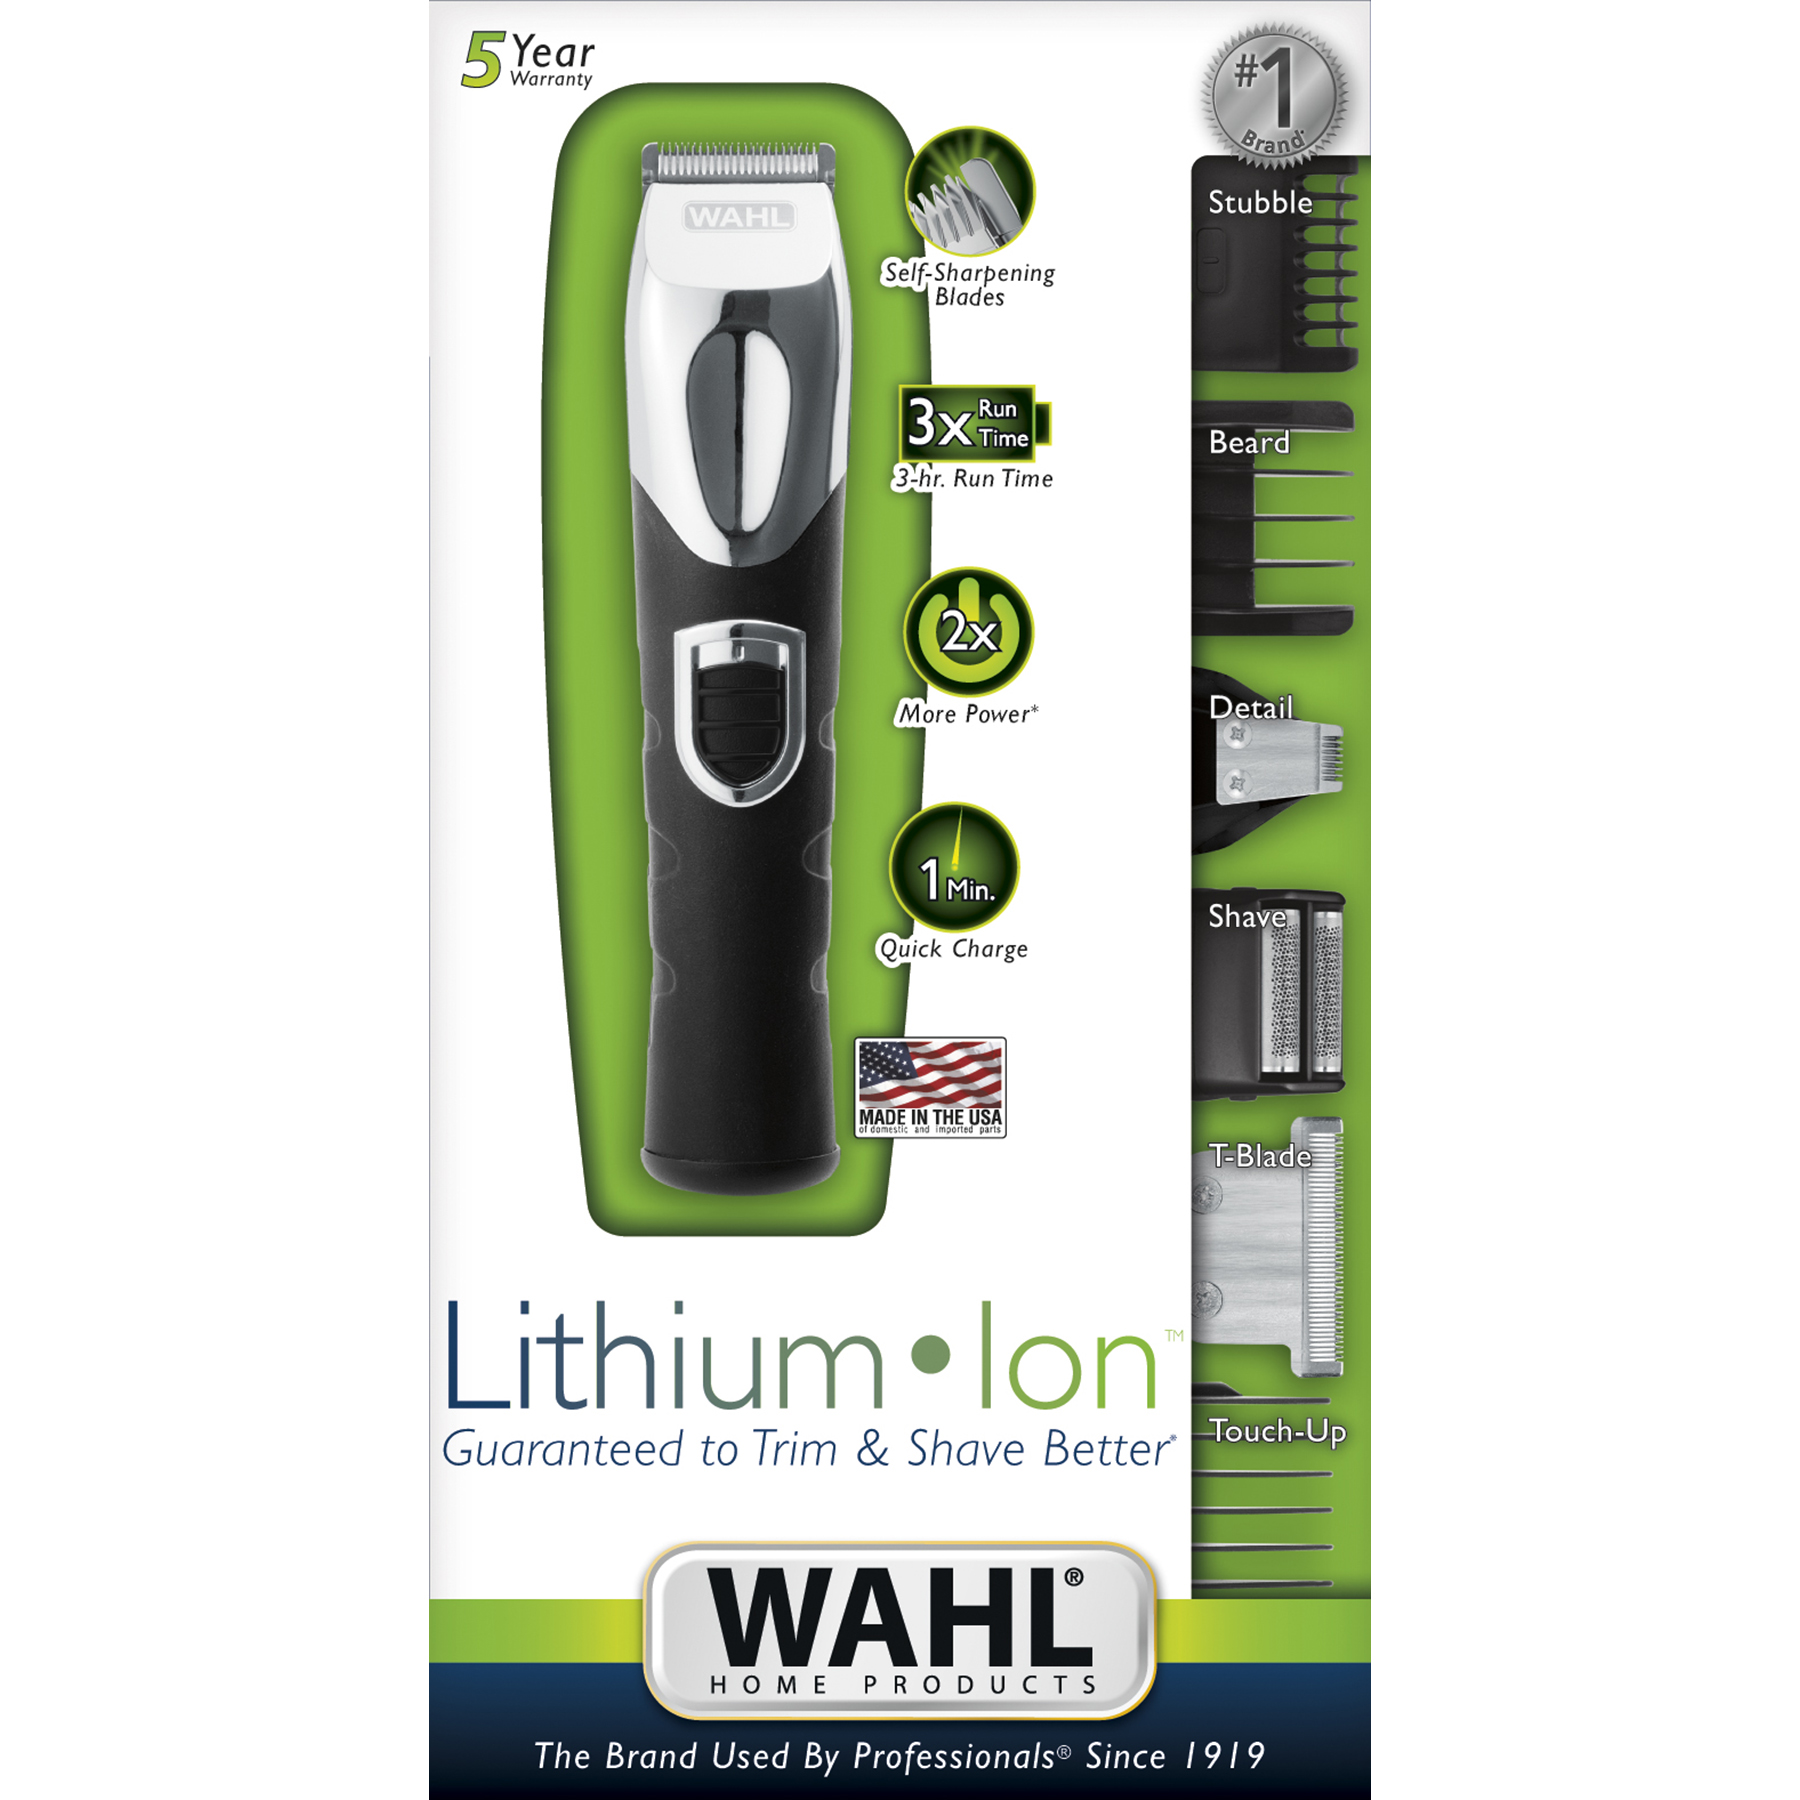 wahl all in one trimmer